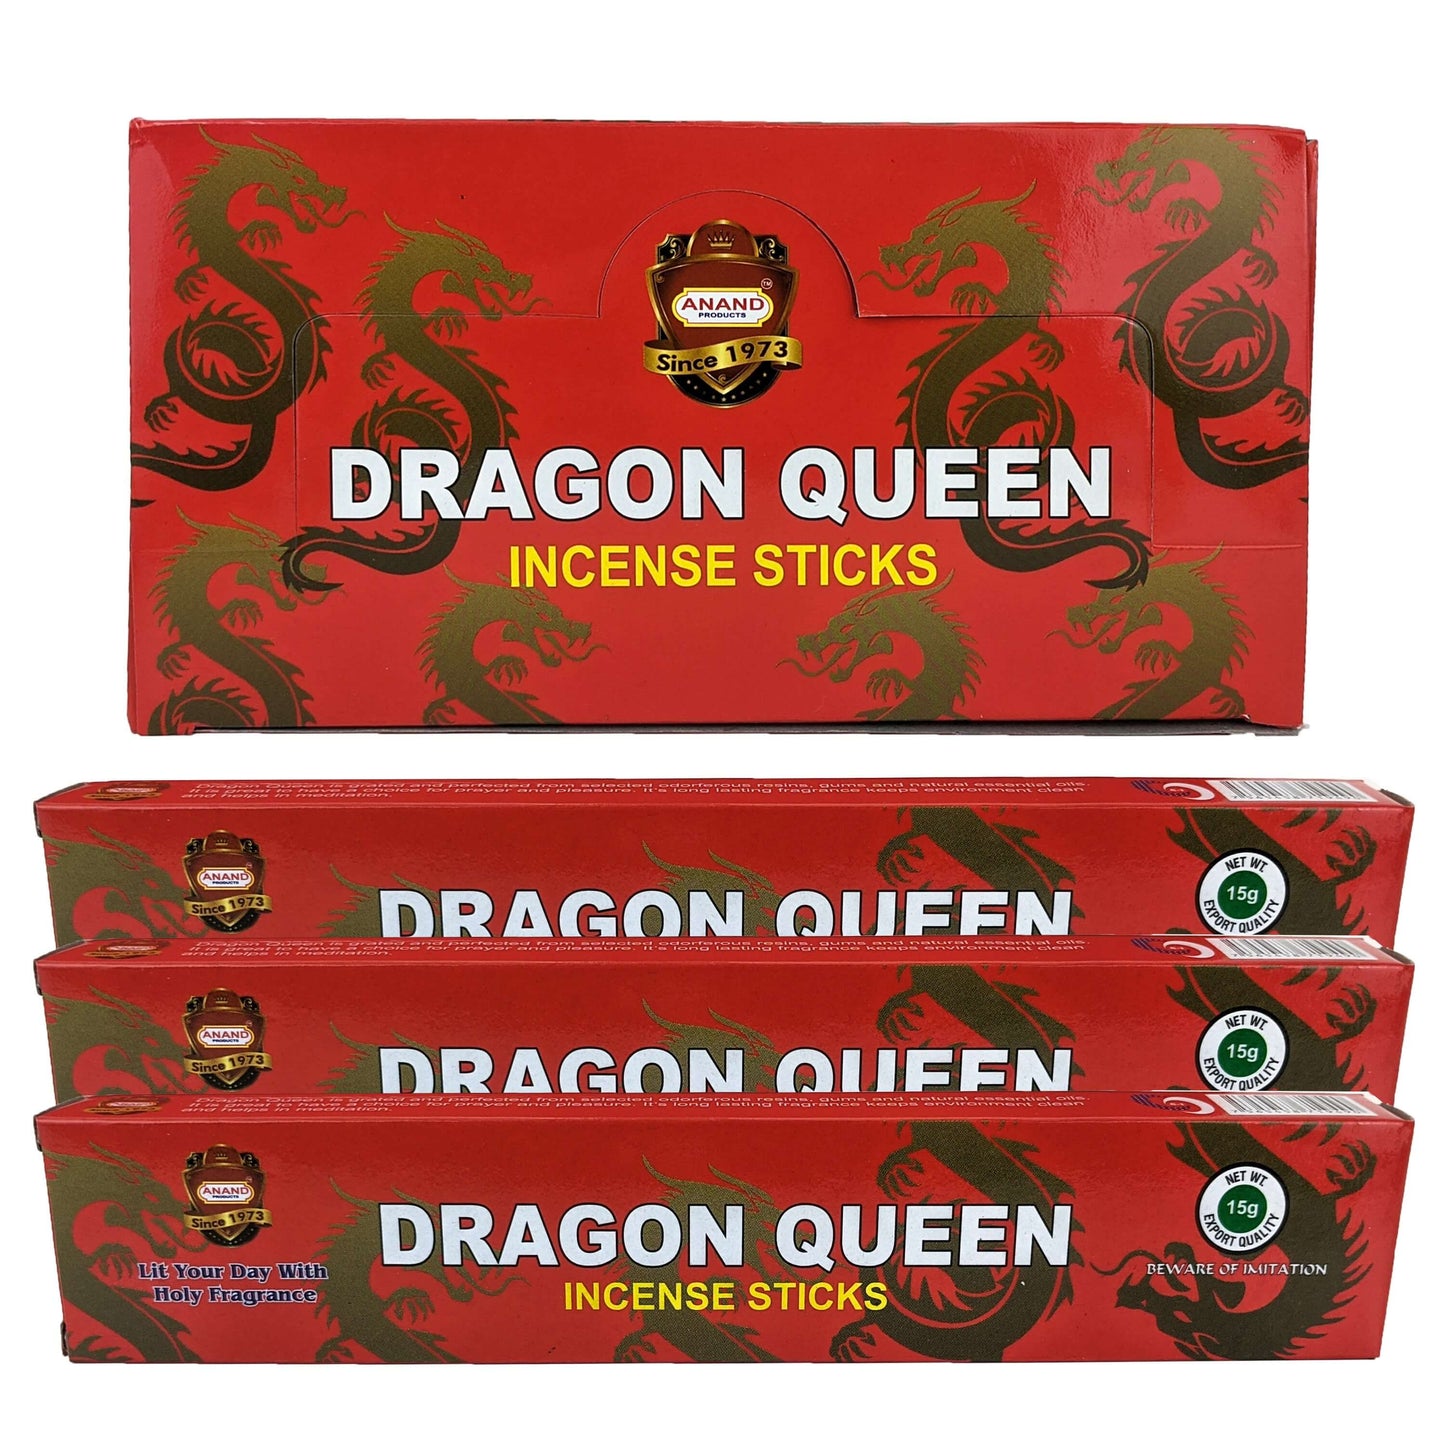 Anand Dragon Queen Incense Box 3